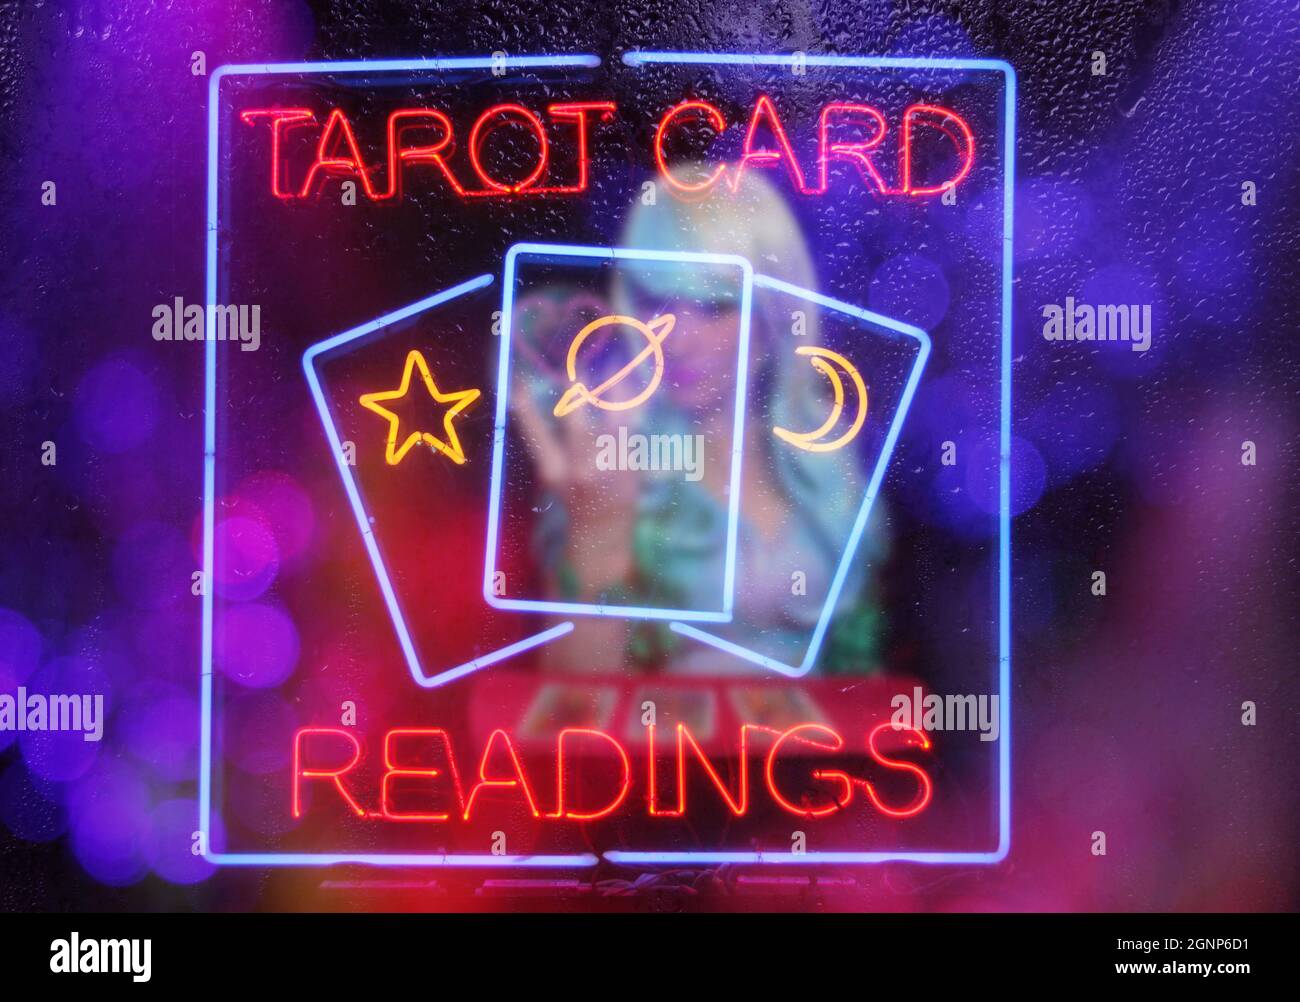 Tarot Card Readings Neon Sign in Window with Psychic Tarot Card Reader blurred in background Stock Photo